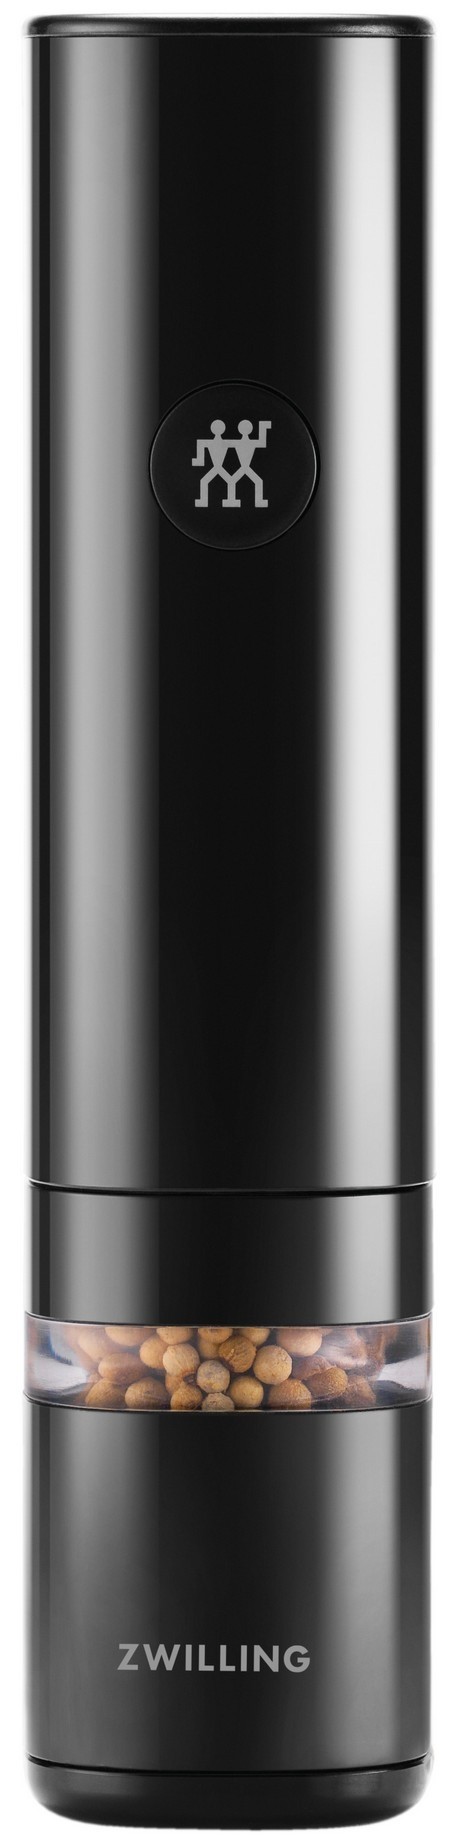 Buy the Zwilling J A Henckels Enfingy Electric Rechargeable Salt or Pepper Mill Black online at smithsofloughton.com